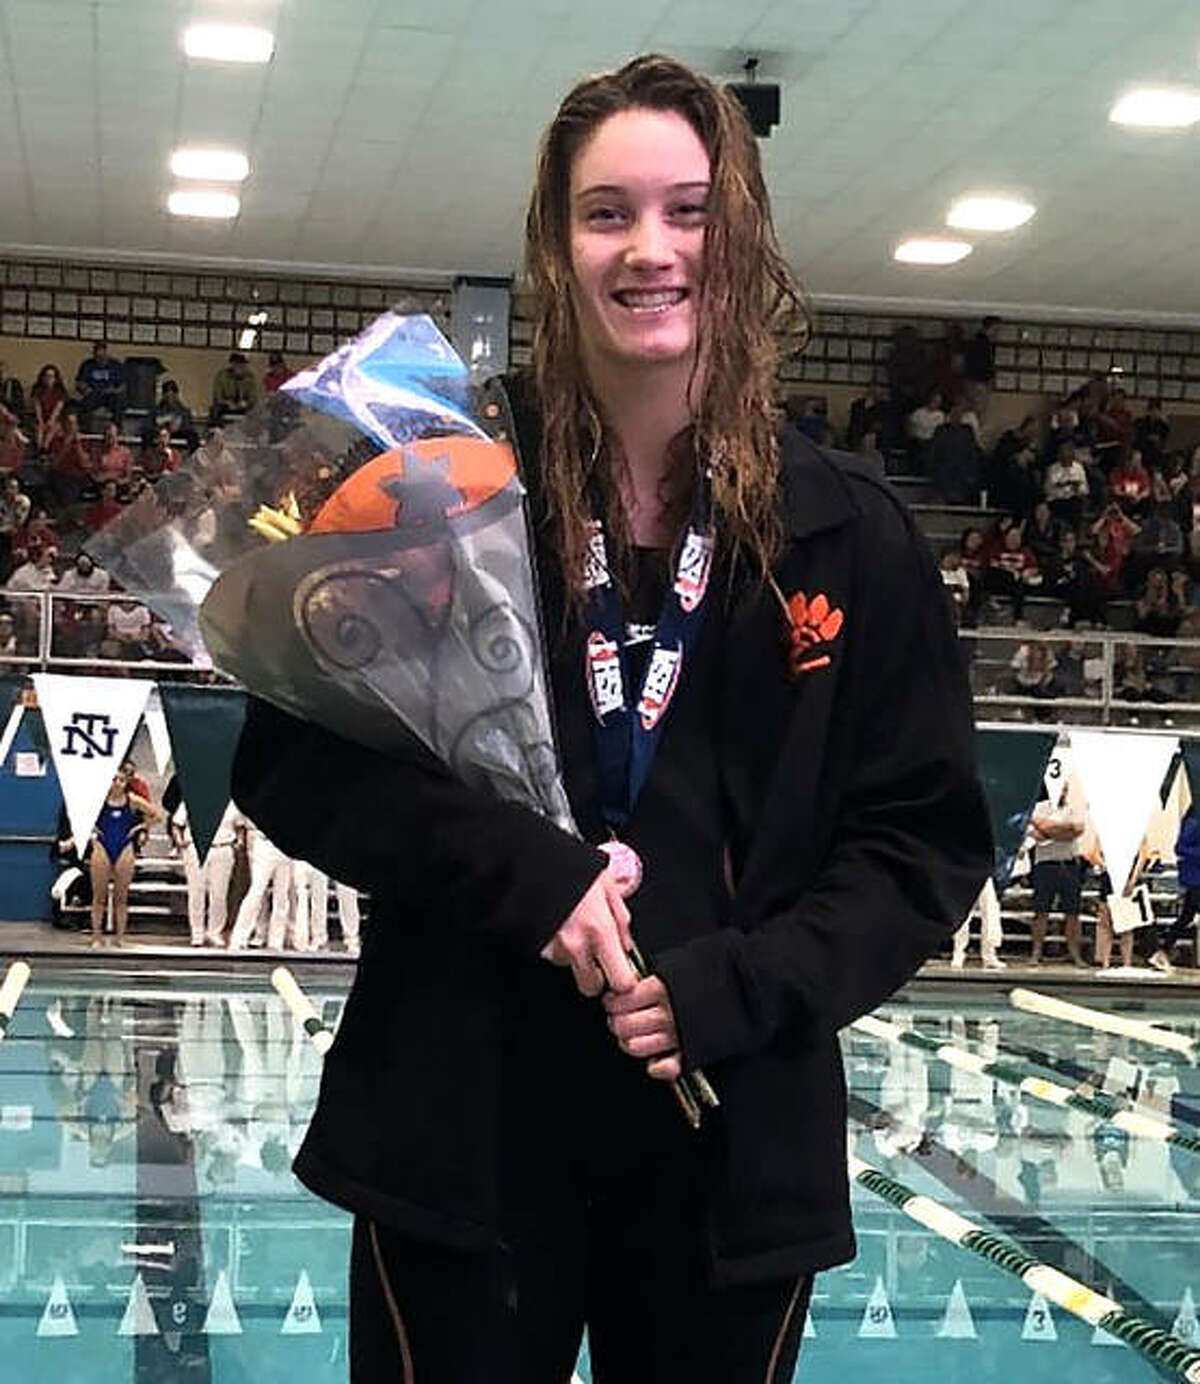 Edwardsville senior Josie Bushell poses with her medal after placing 12th in the 100-yard freestyle on Saturday in the finals of the state meet at New Trier High School.